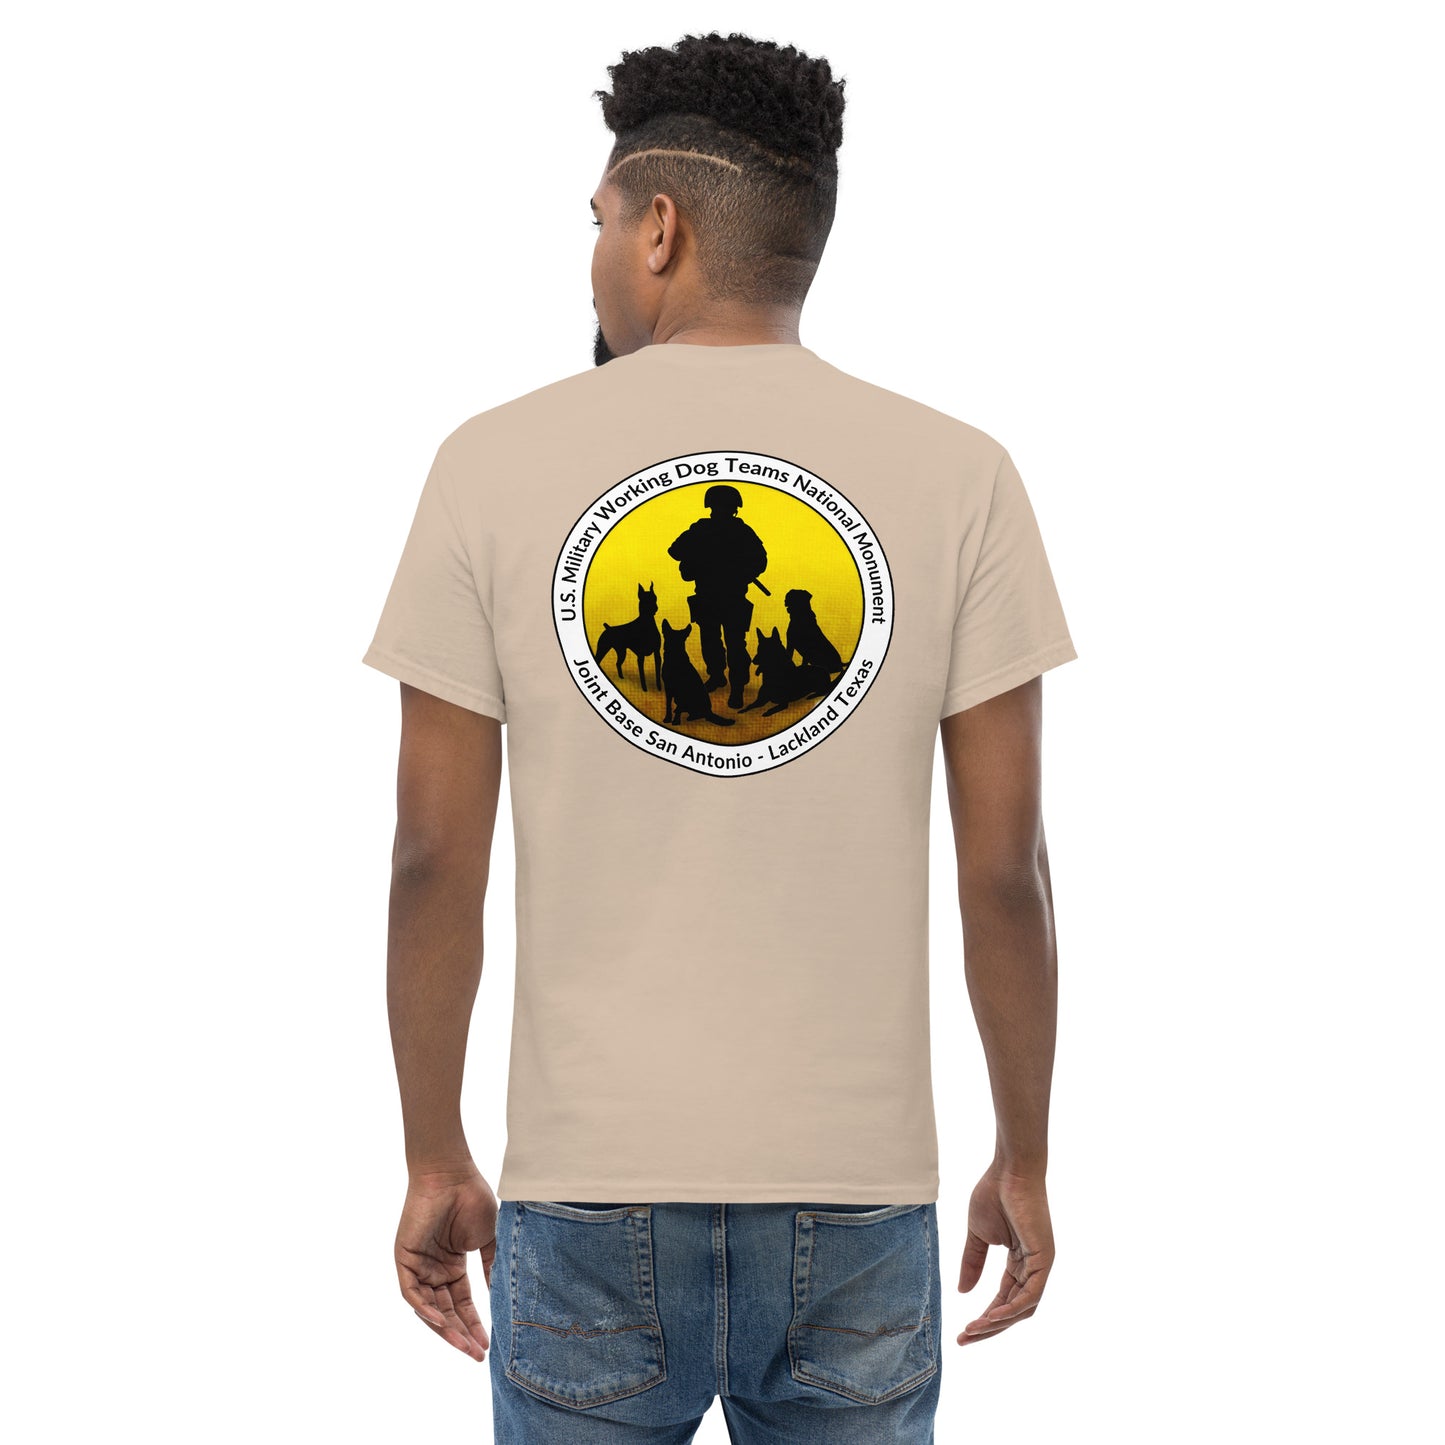 MWDT National Monument - Logo Tee